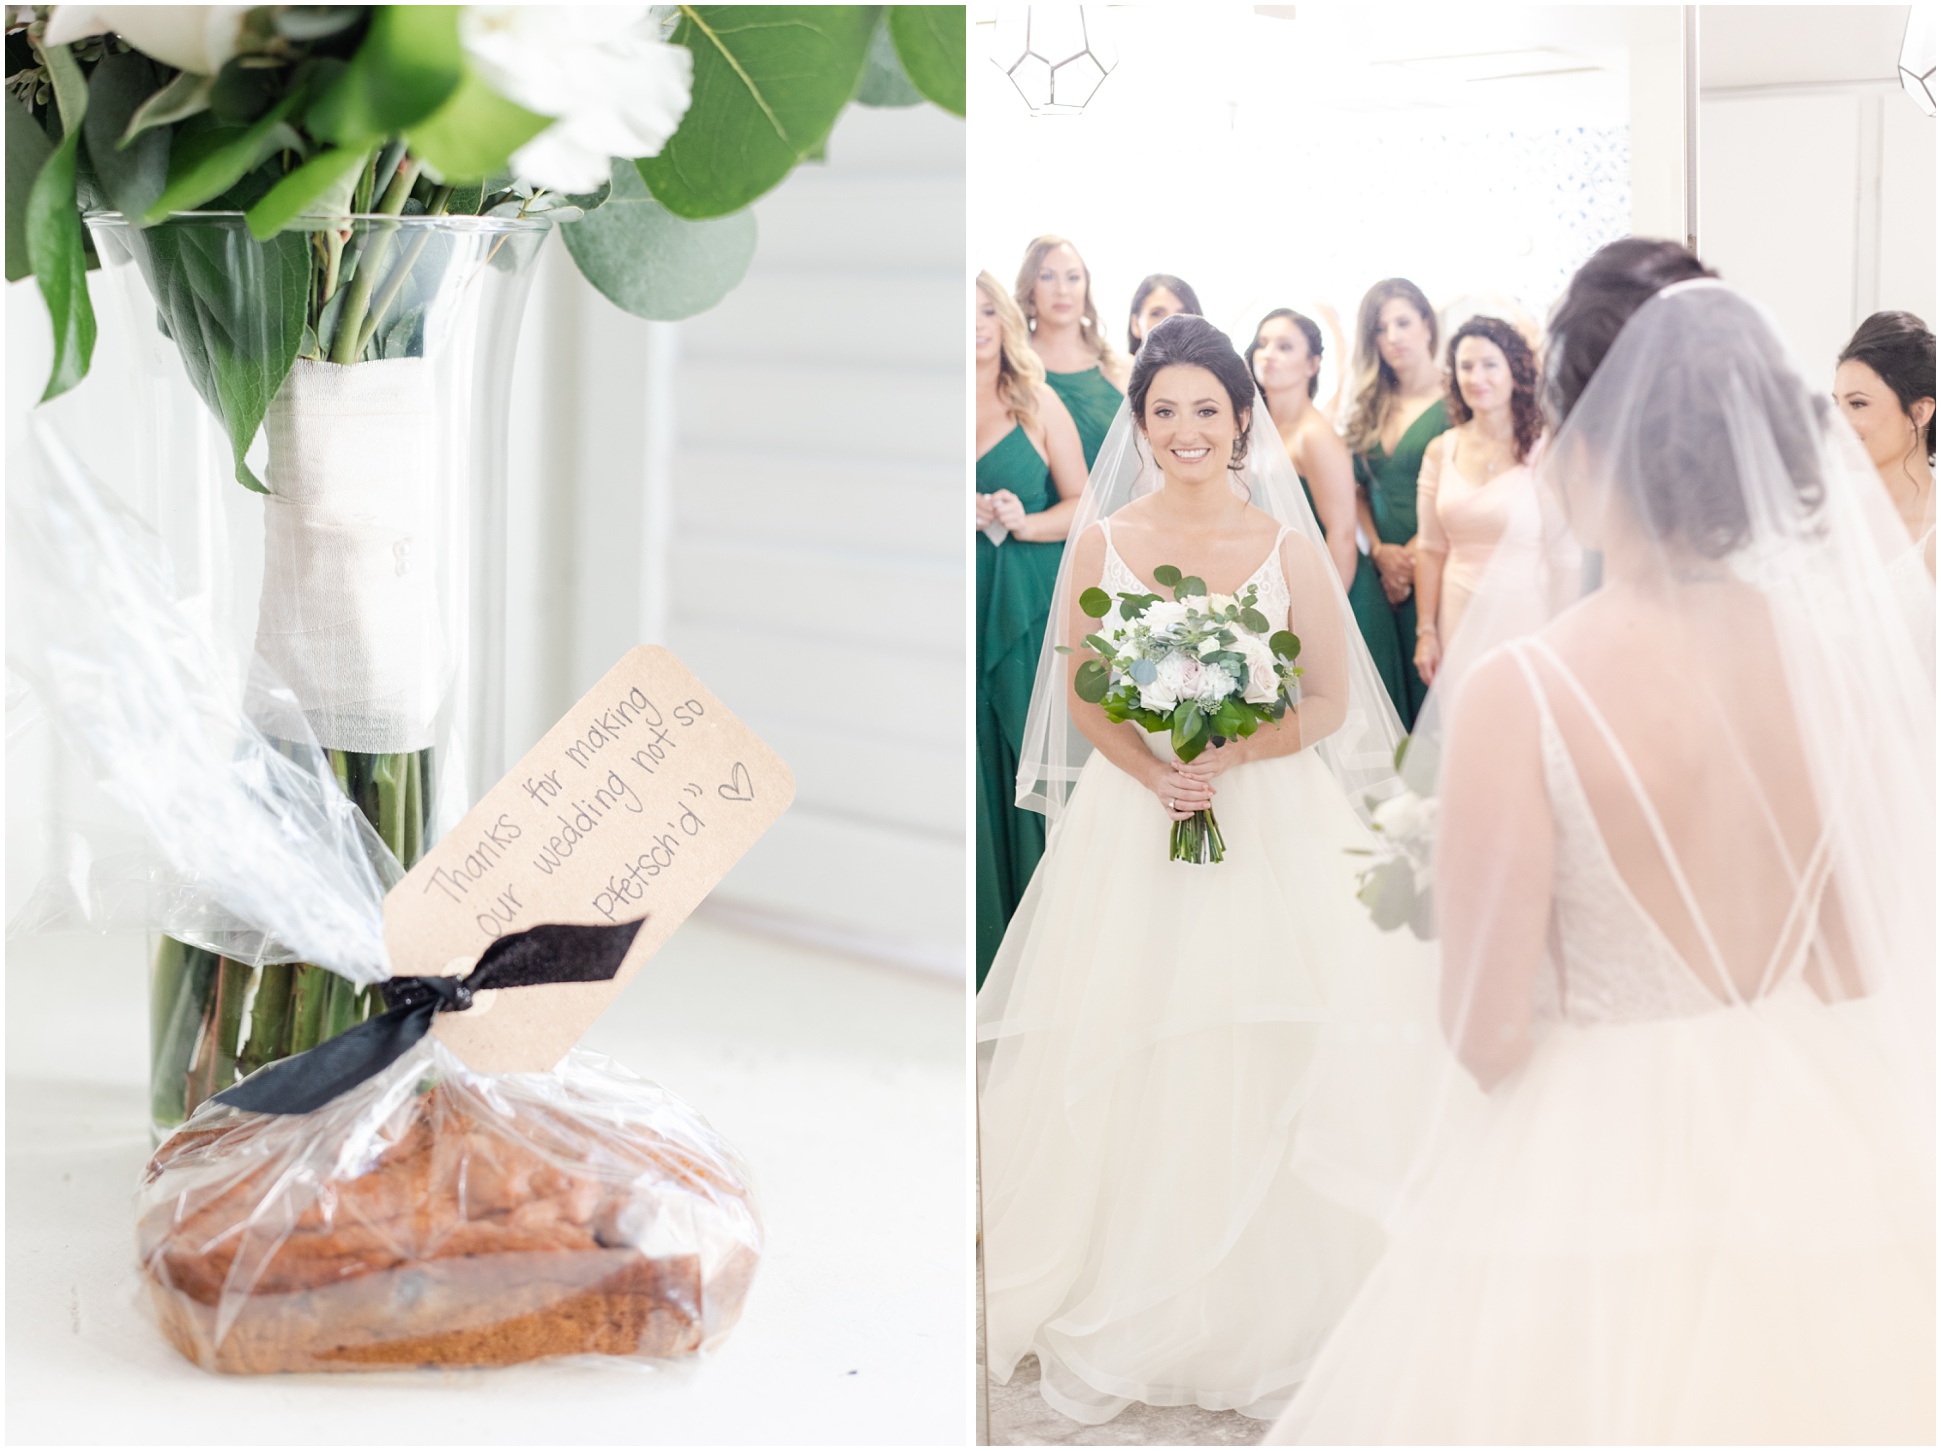 Pumpkin chocolate chip bread loaf in front of bouquet, bride holding bouquet in front of mirror with bridesmaids behind her